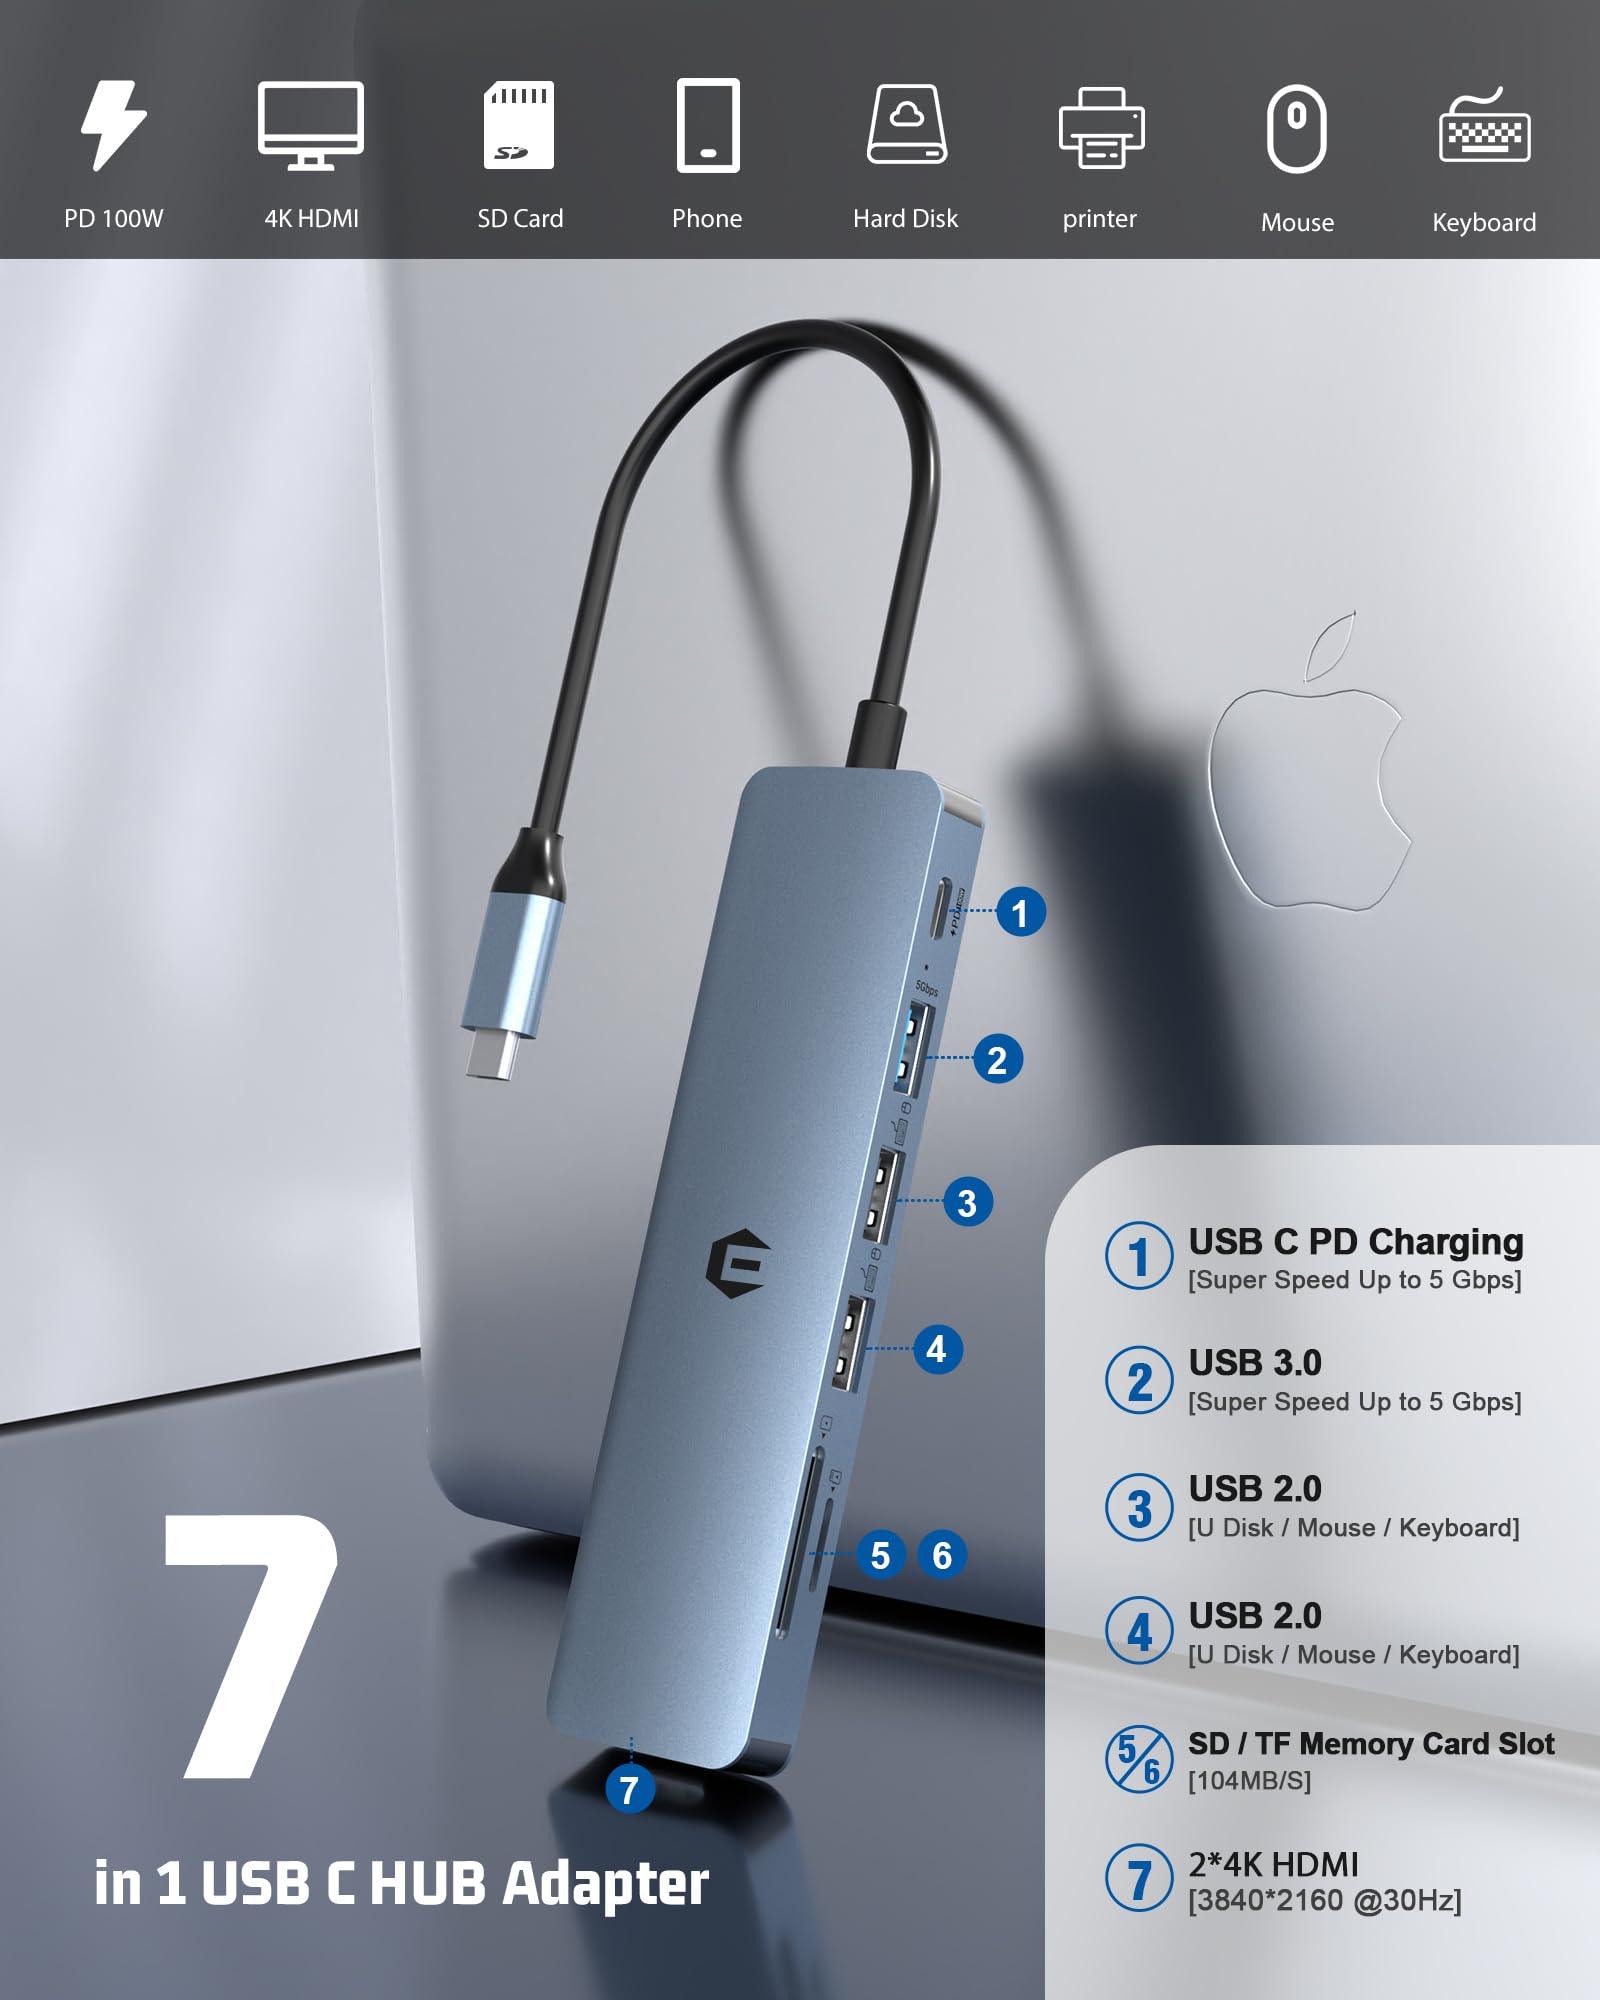 7 in 1 USB C Hub, oditton USB Adapter, 5 Gbps Data Transfer, a 7 in 1 hub Featuring 4K HDMI, 100W PD, USB 3.0 Ports, 2 x USB 2.0 Ports and an SD/TF Card Reader